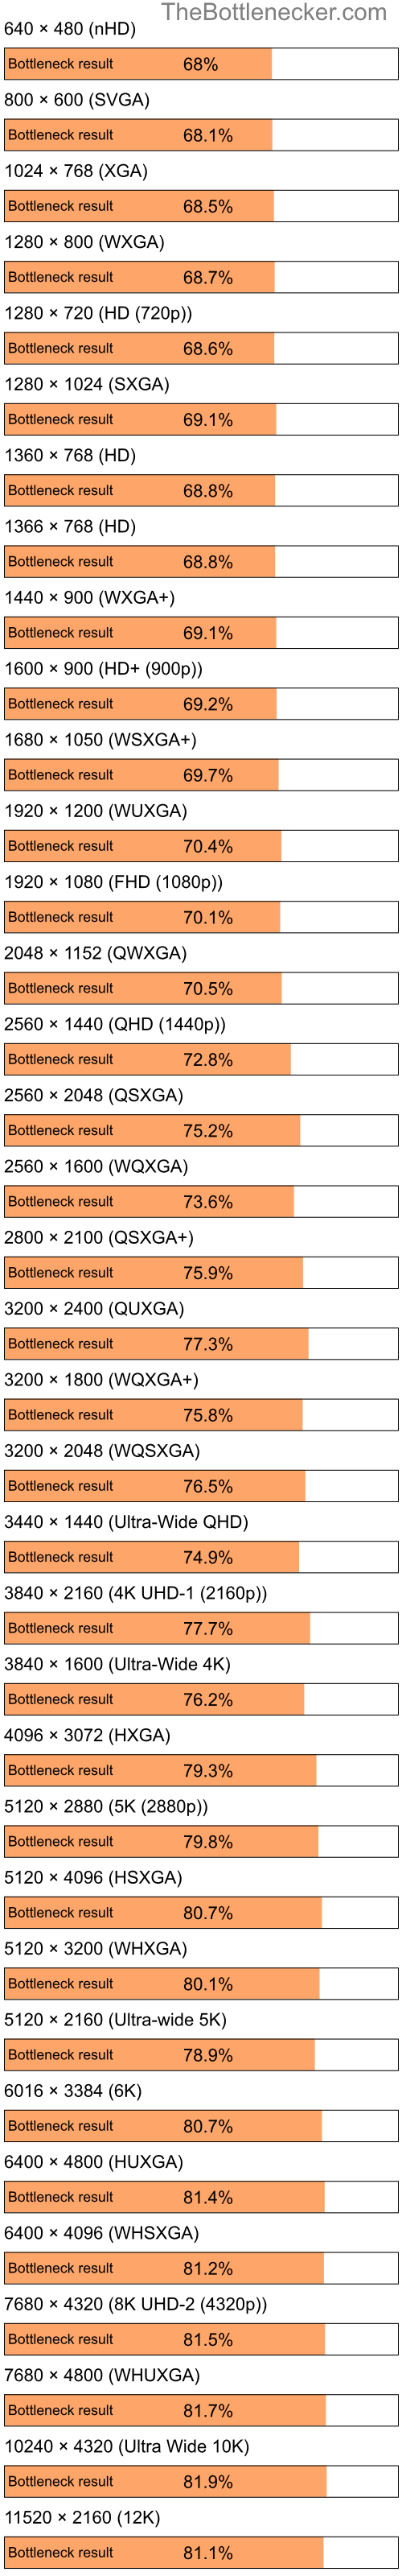 Bottleneck results by resolution for Intel Pentium 4 and AMD Mobility Radeon HD 2400 in Graphic Card Intense Tasks